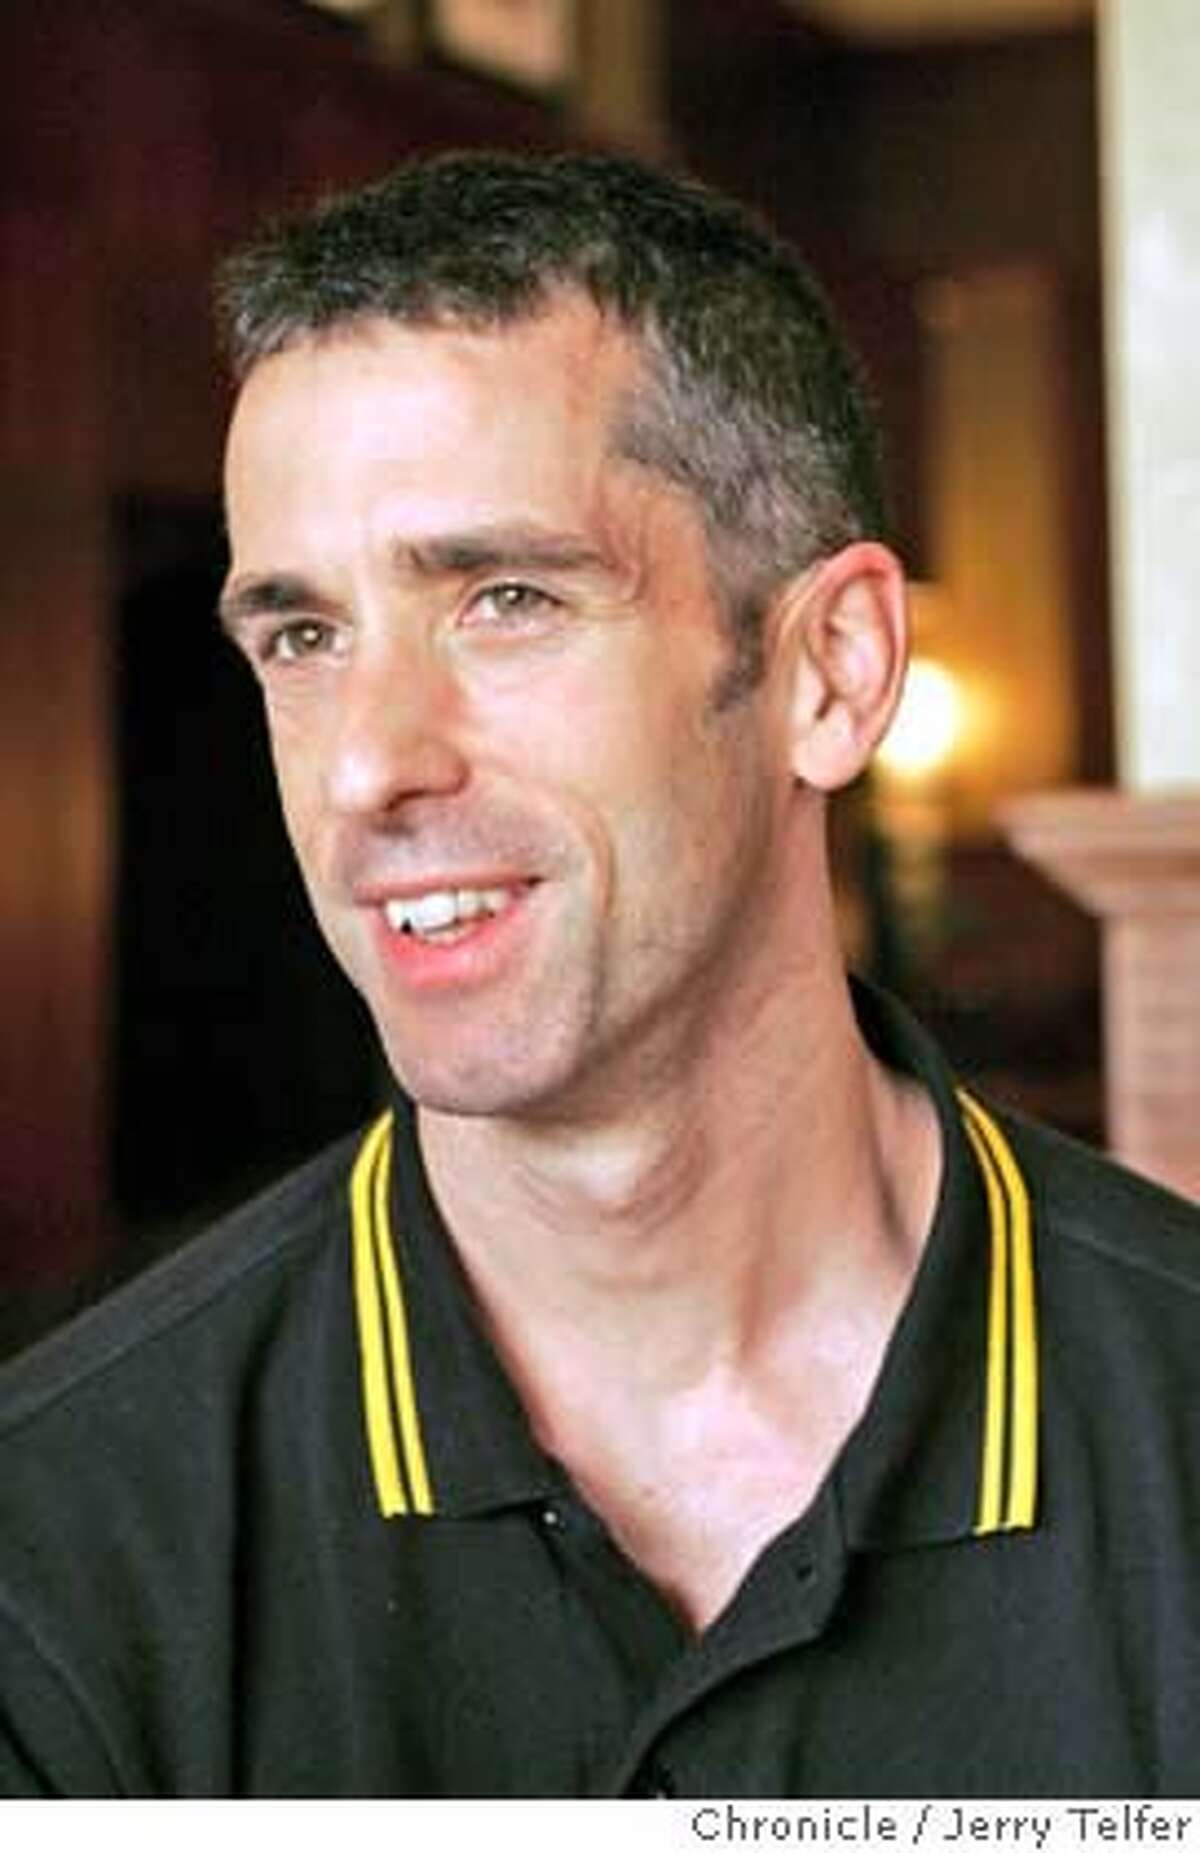 savage11_057_jlt.jpg Author Dan Savage has written a new book - this one about same-sex marriage. Photo by JERRY TELFER / The Chronicle